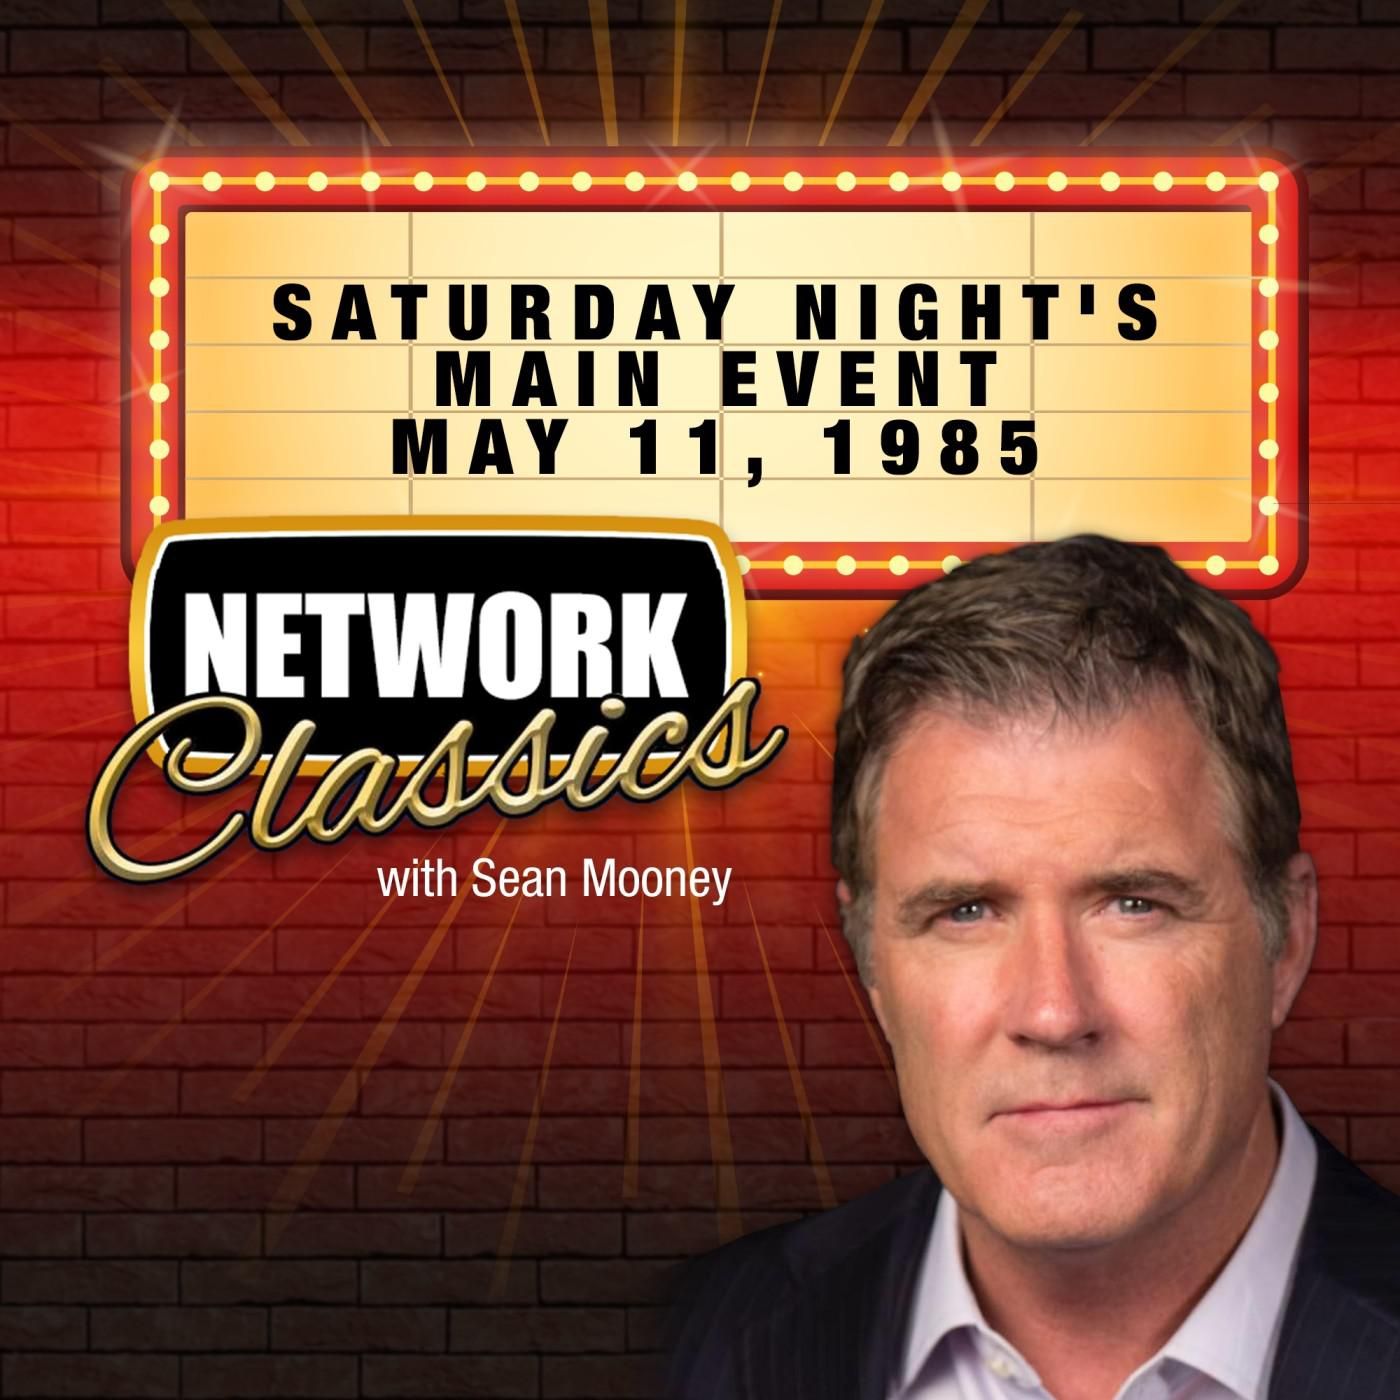 Network Classics: Saturday Night's Main Event - May 11, 1985: PRIME TIME VAULT